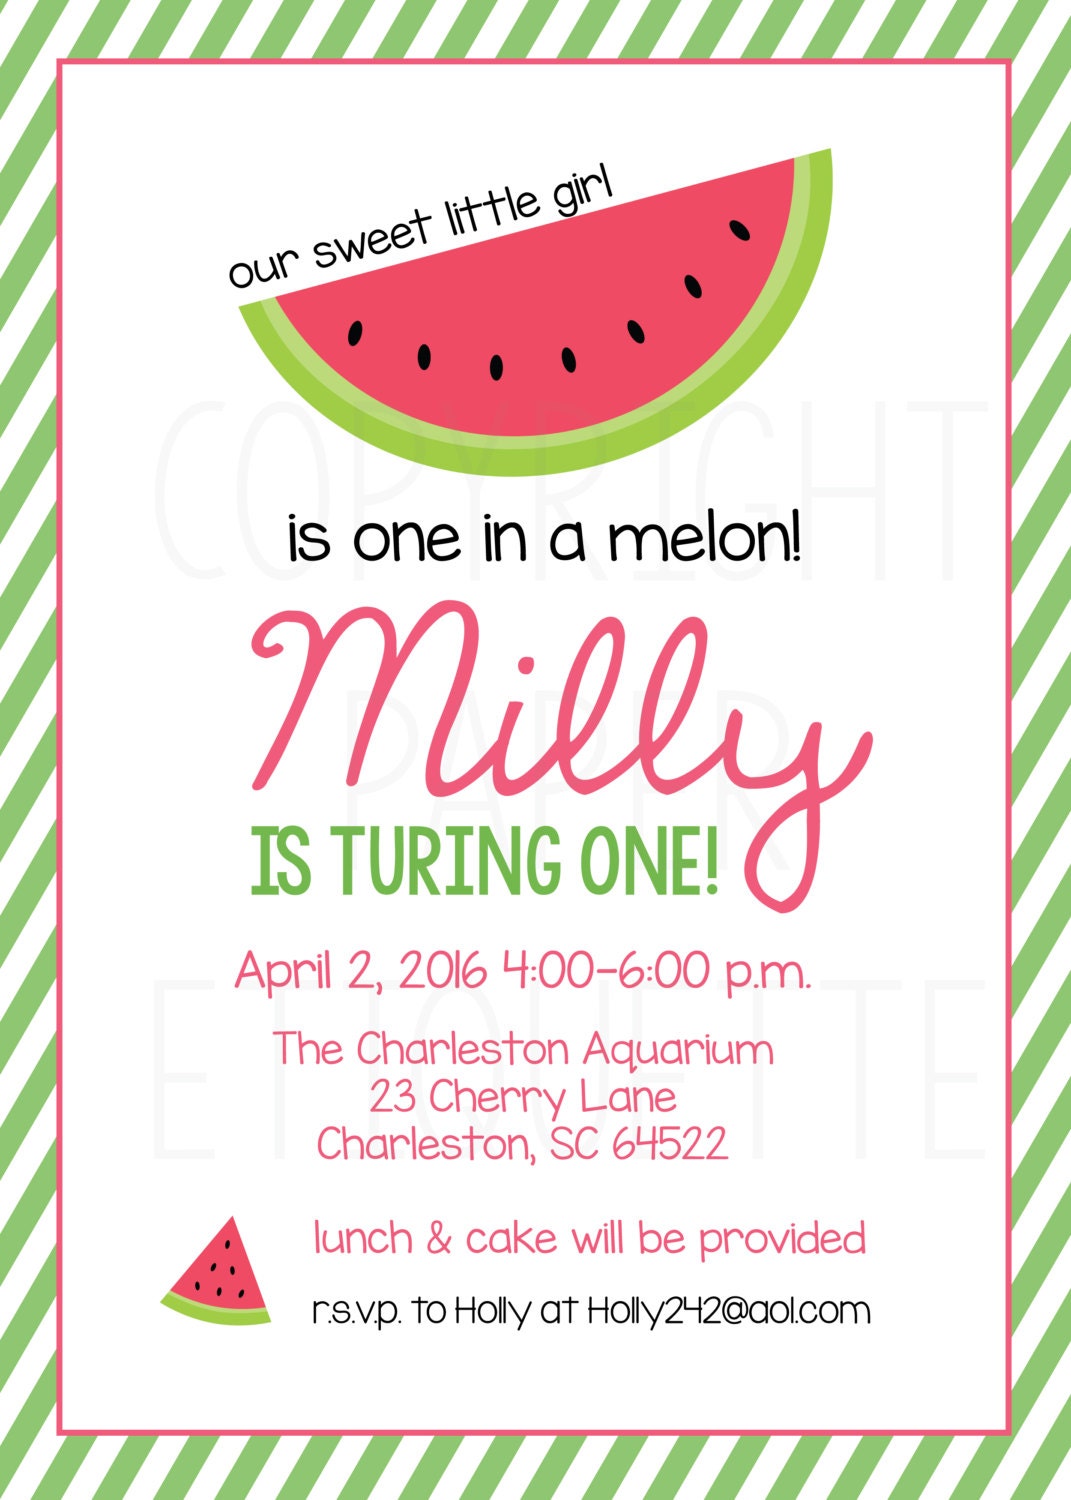 Download One In a Melon Birthday Invitation Oh What Fun Turning One